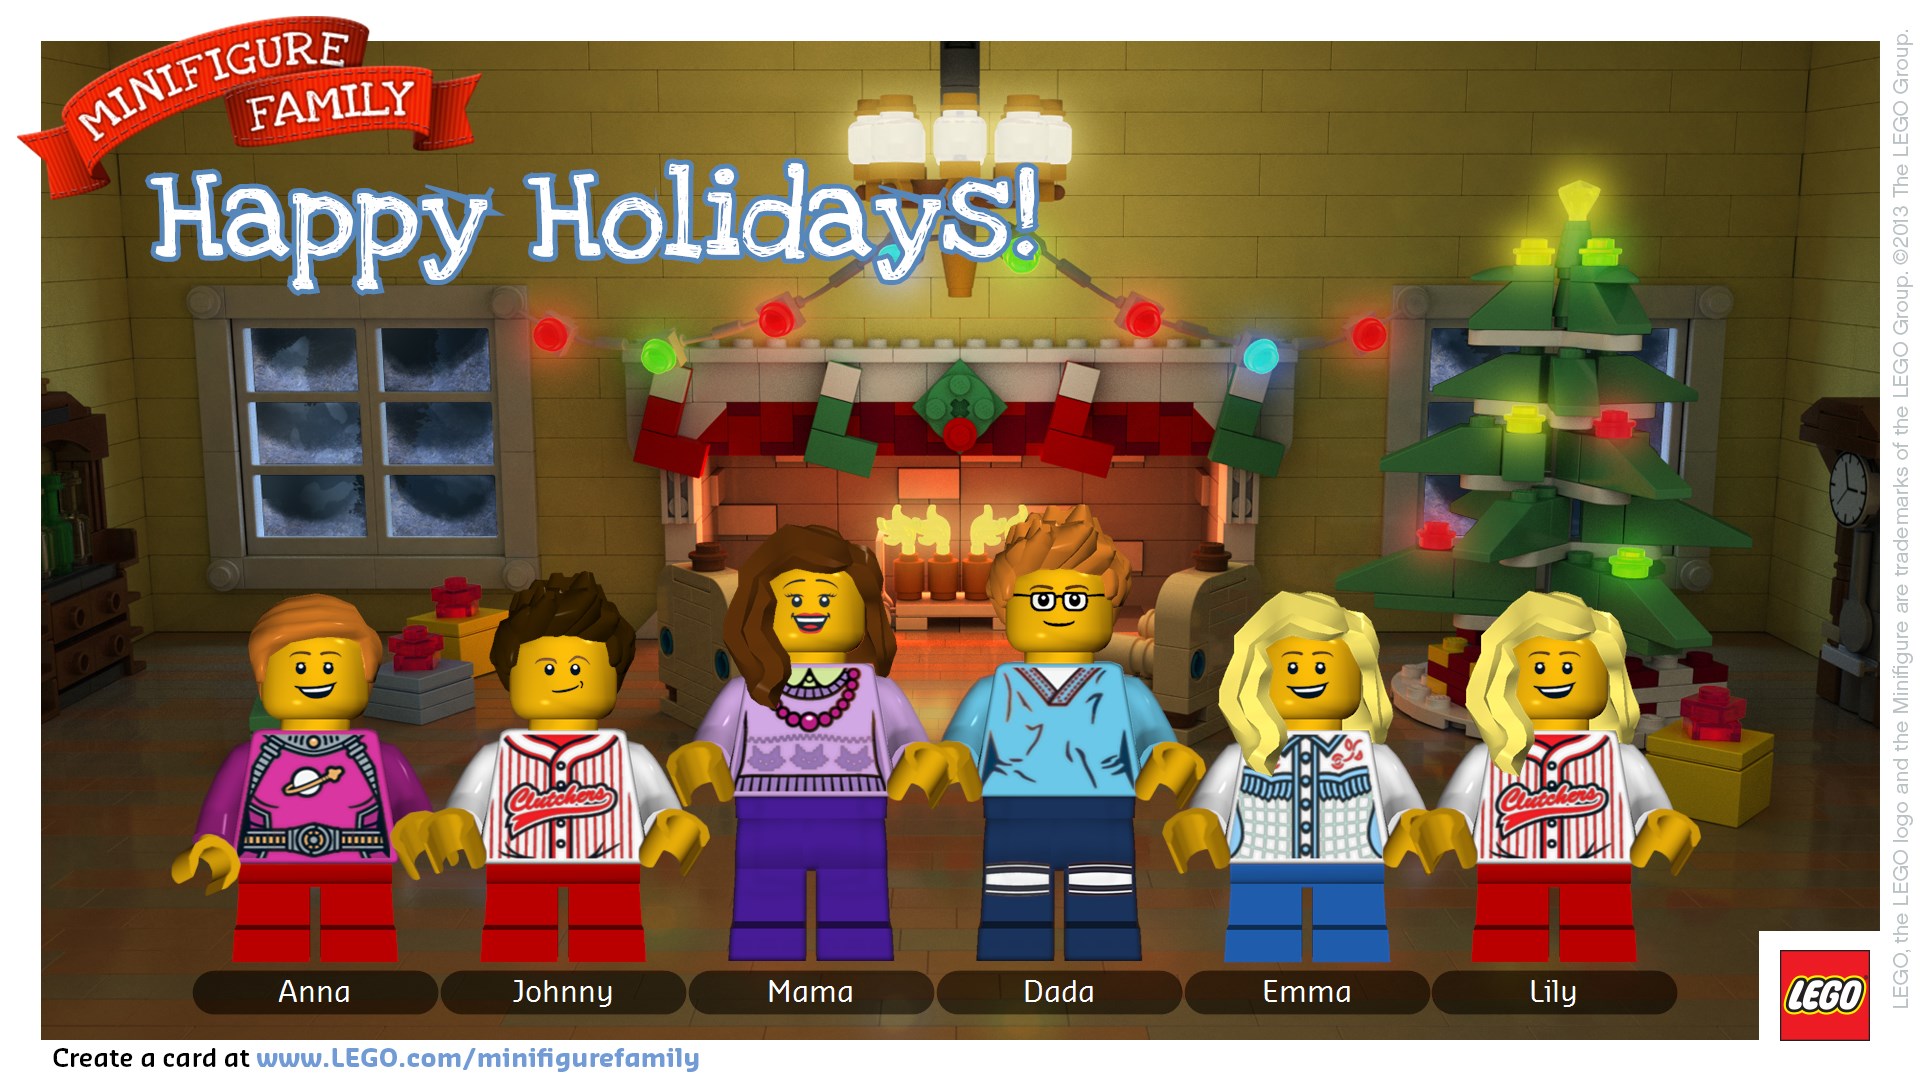 Minifigure holiday card fun from LEGO :)